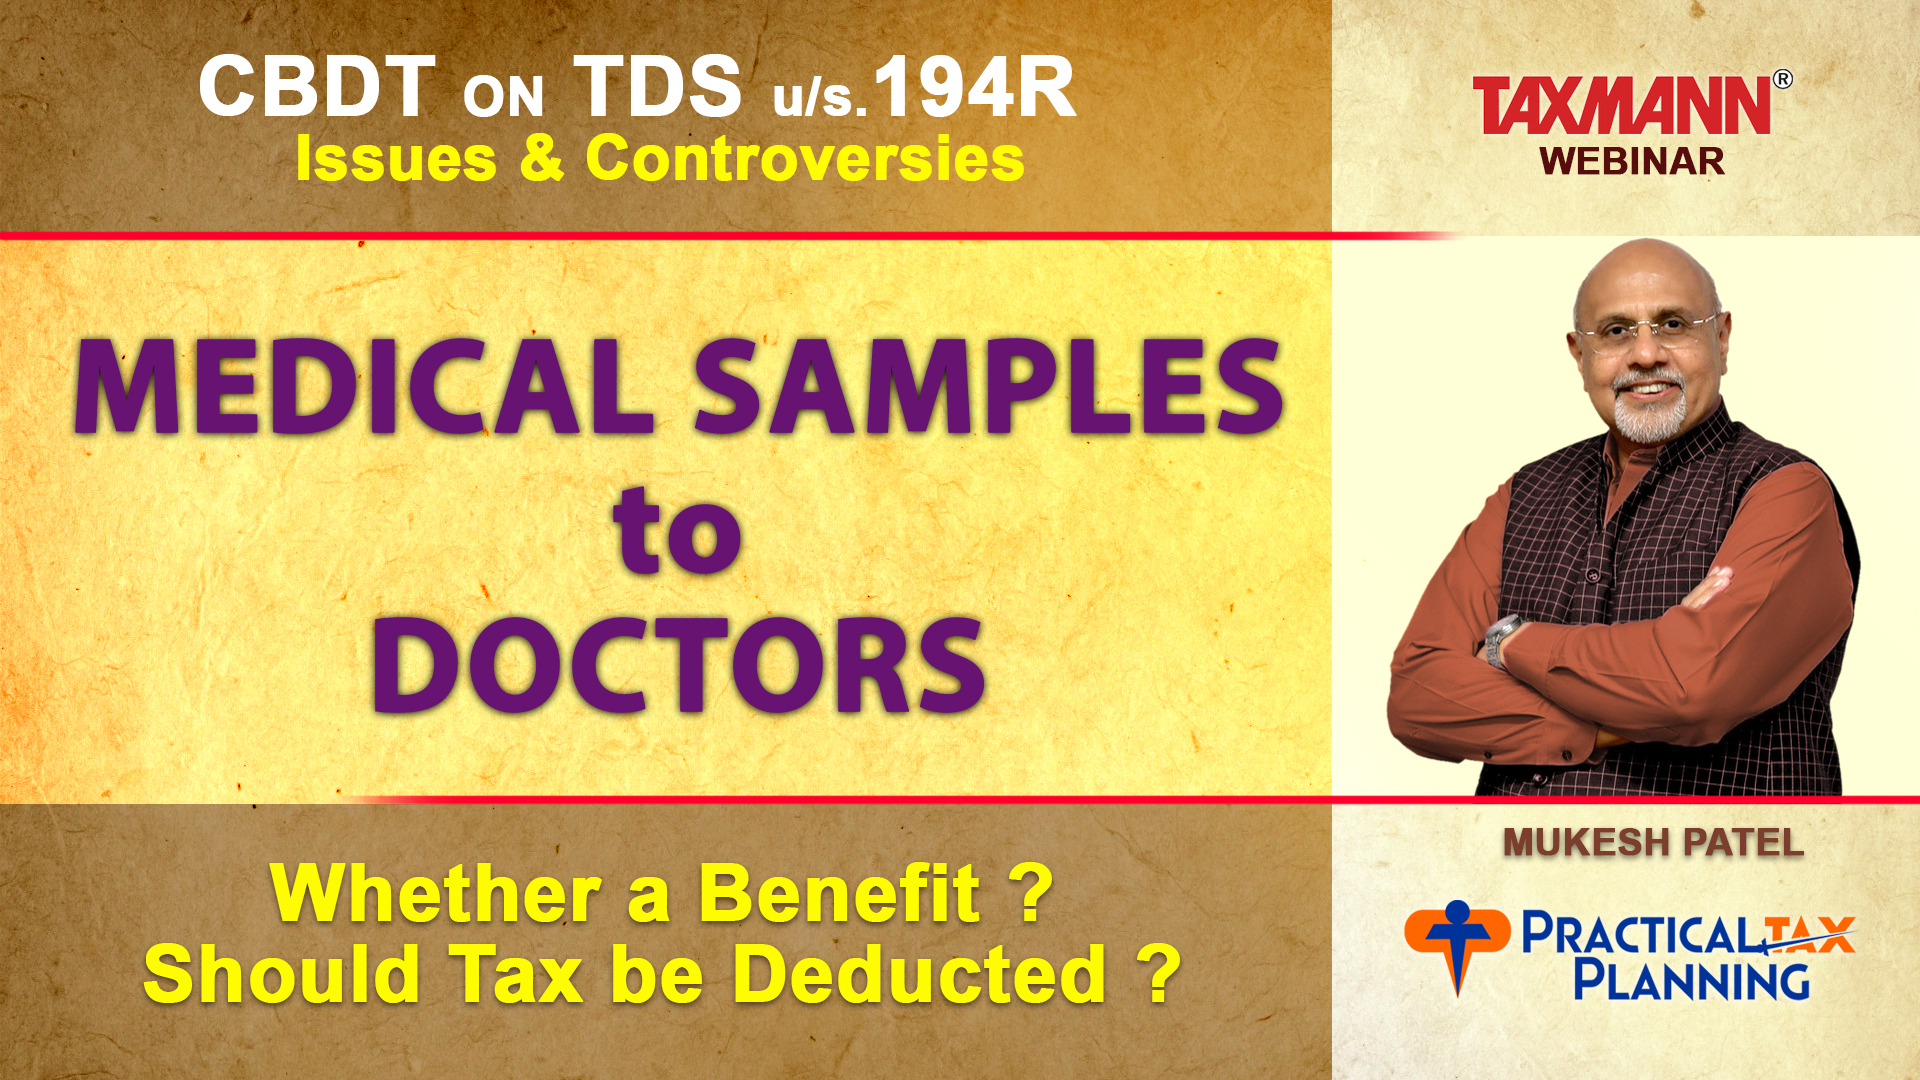 MEDICAL SAMPLES TO DOCTORS Is It Benefit Liable To TDS Tax 